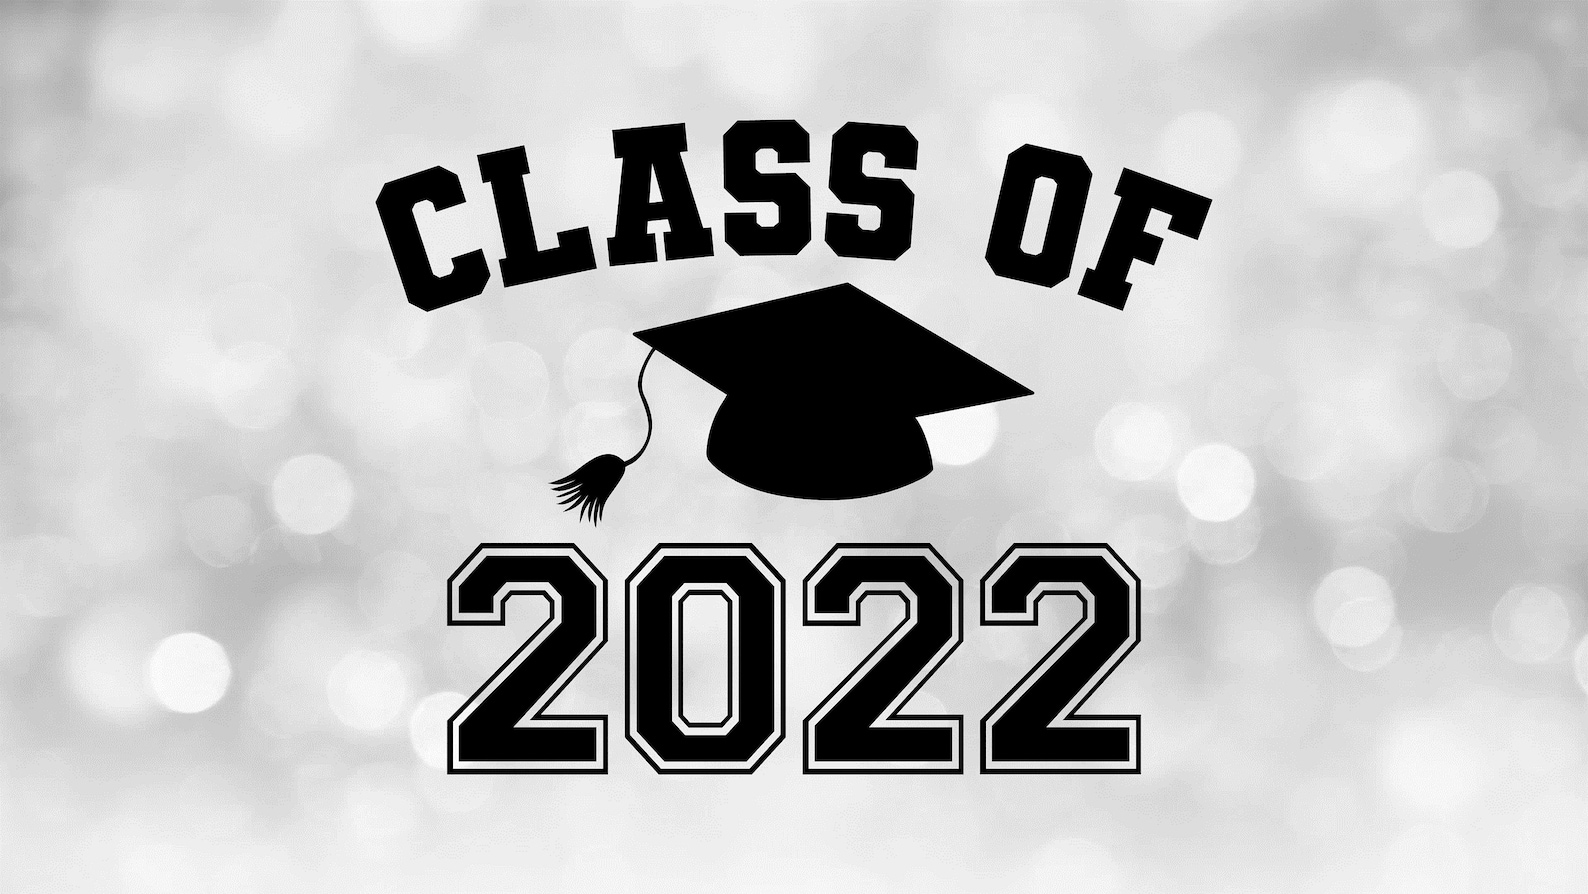 Educational Clip-Art: Black Class of 2022 Arched /College | Etsy